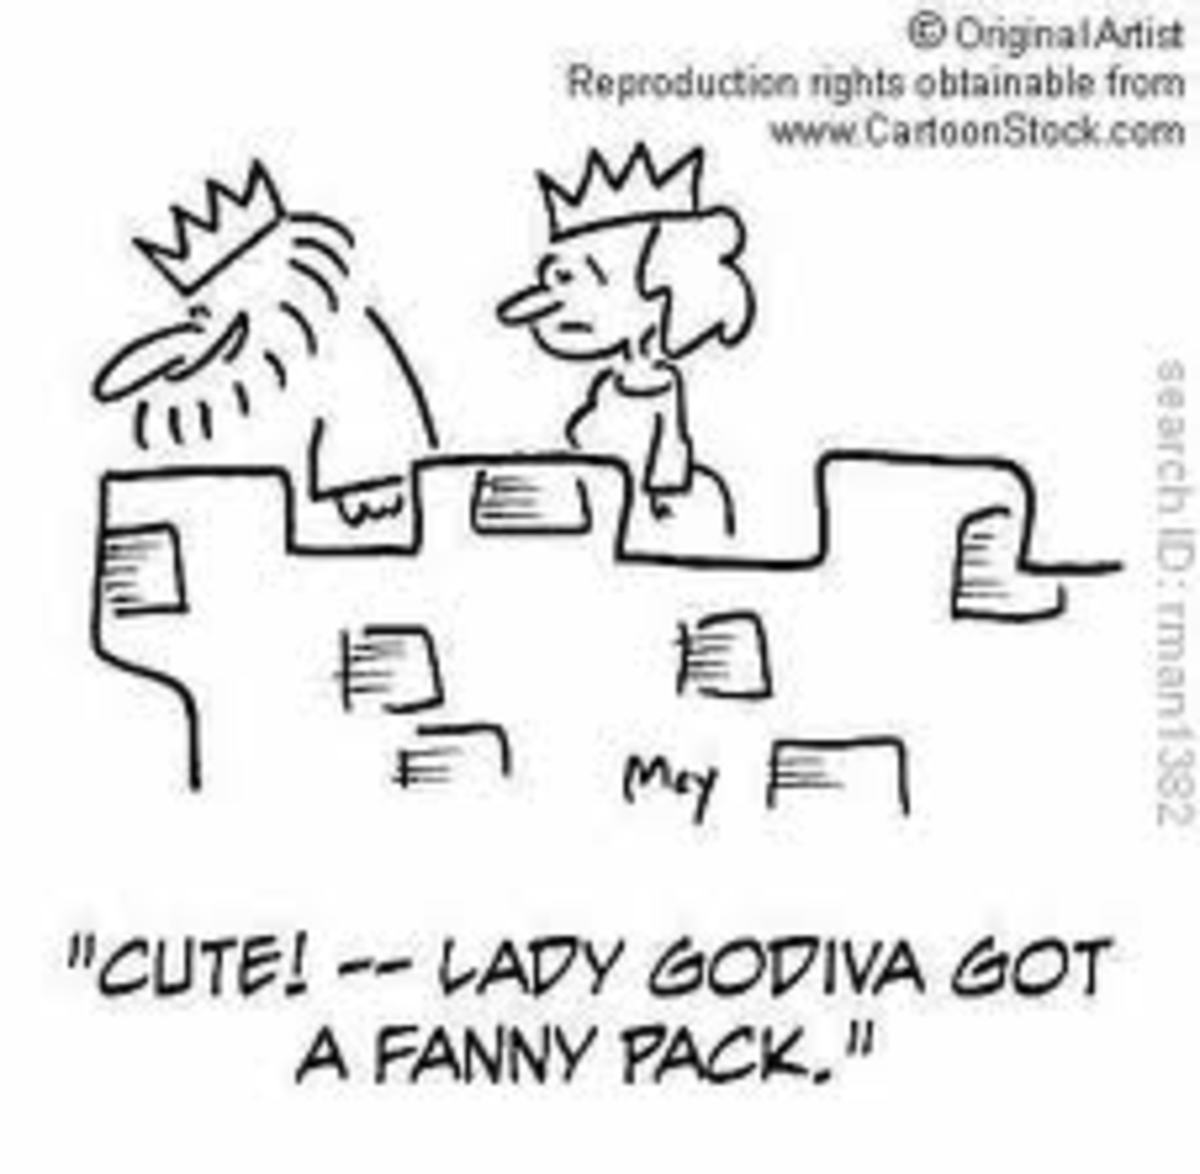 interview-with-lady-godiva